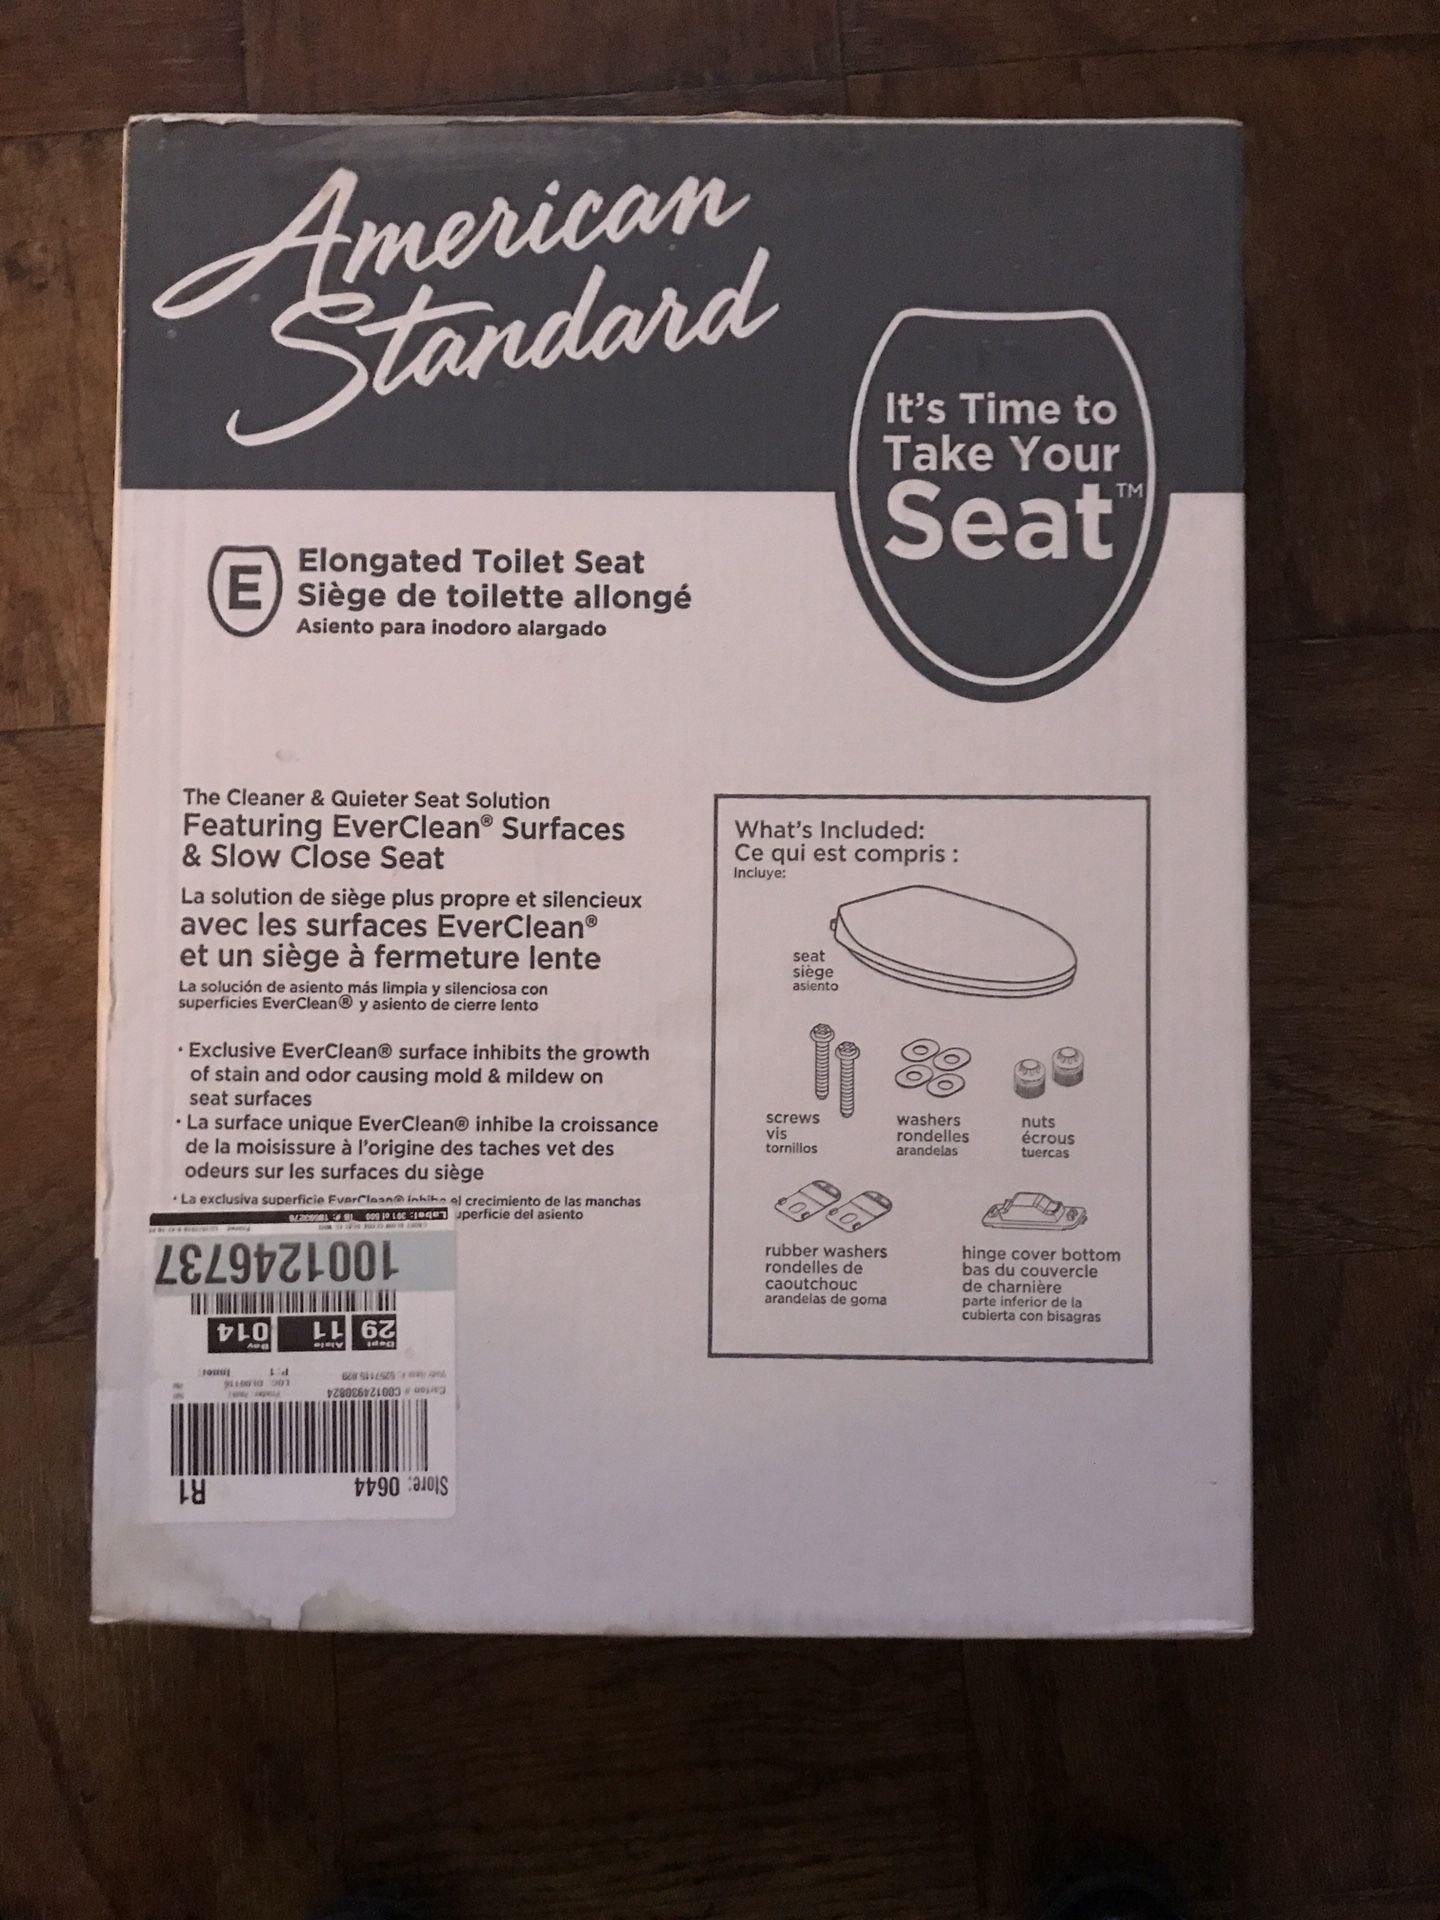 Elongated toilet seat (never used)